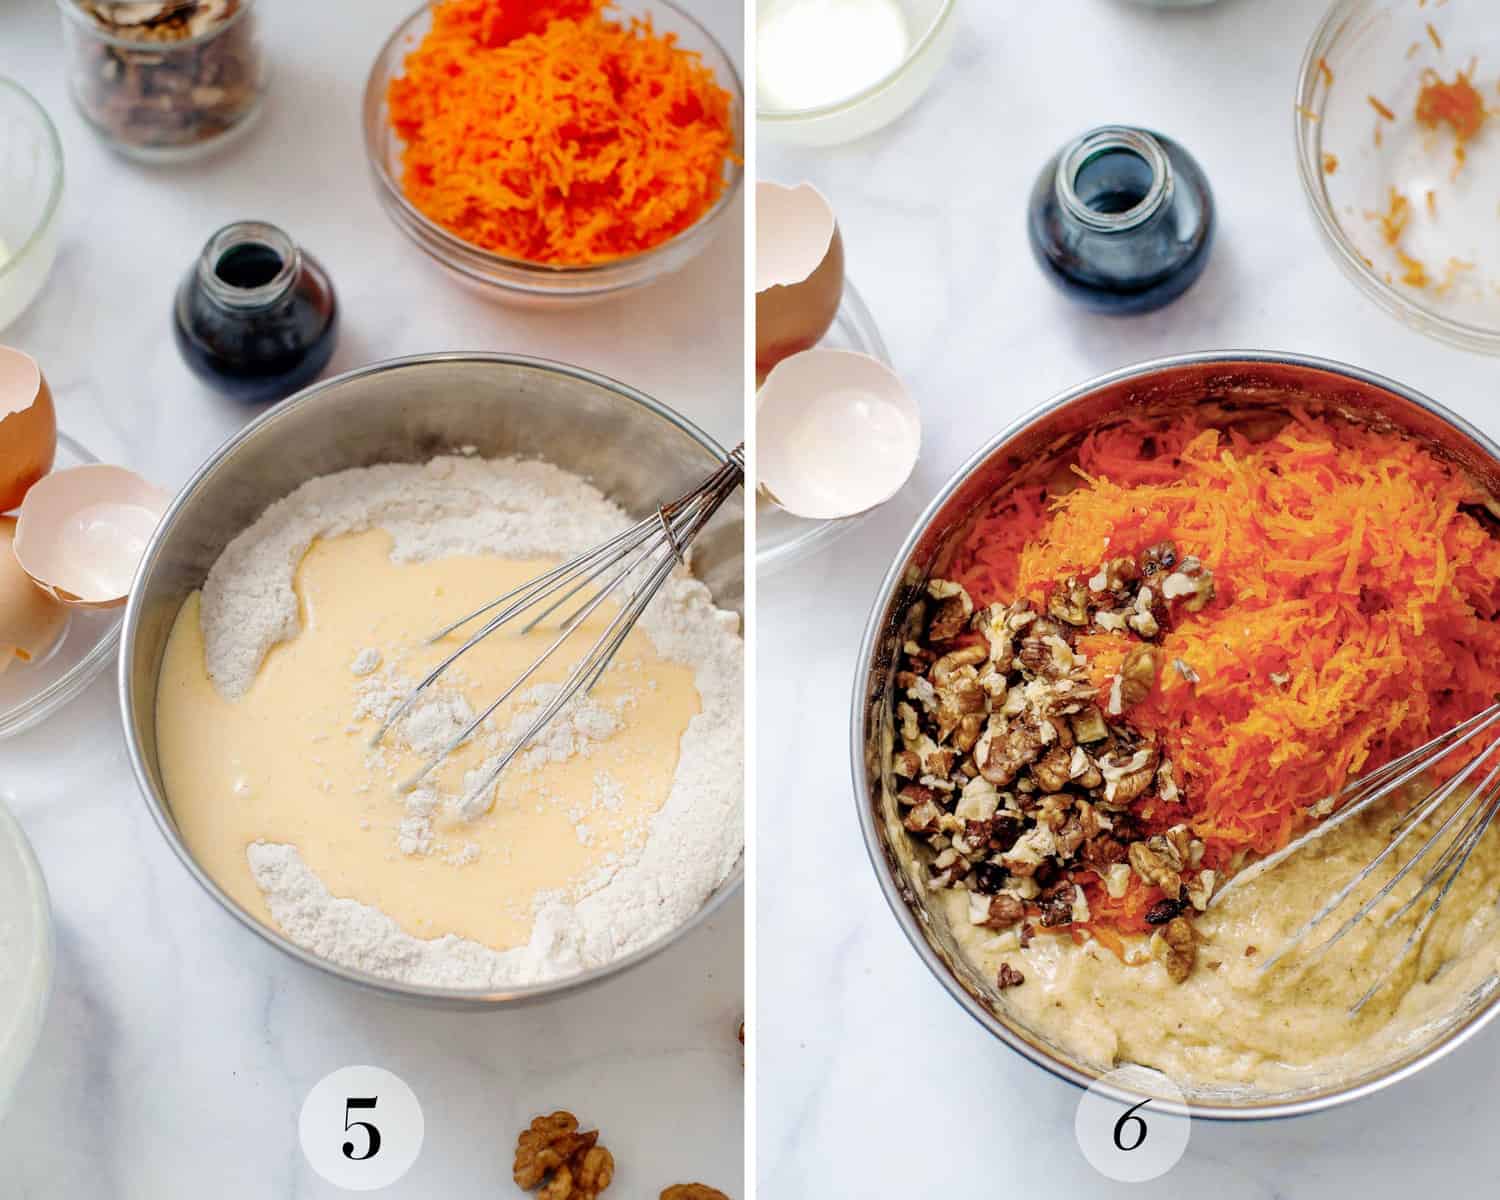 Two photos showing mixing the wet ingredients with carrot and walnut for carrot cake. 